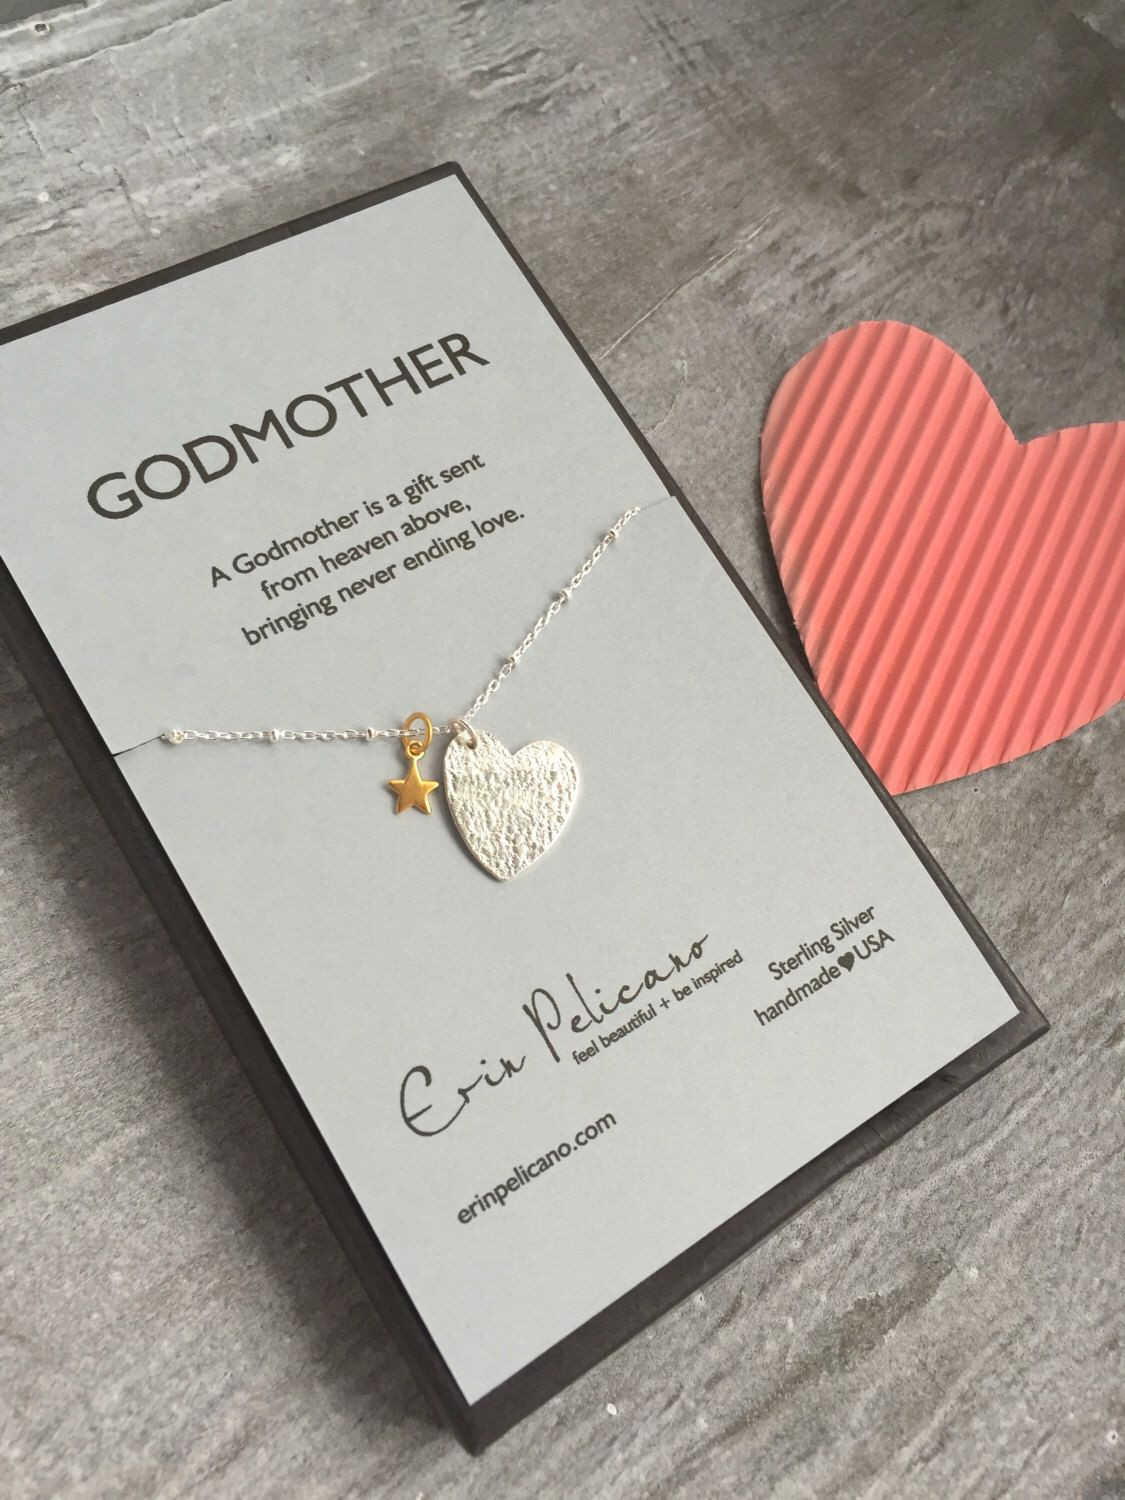 Godfather Gift Ideas Baptism
 Godmother Necklace Will You Be My Godmother Gift Baptism